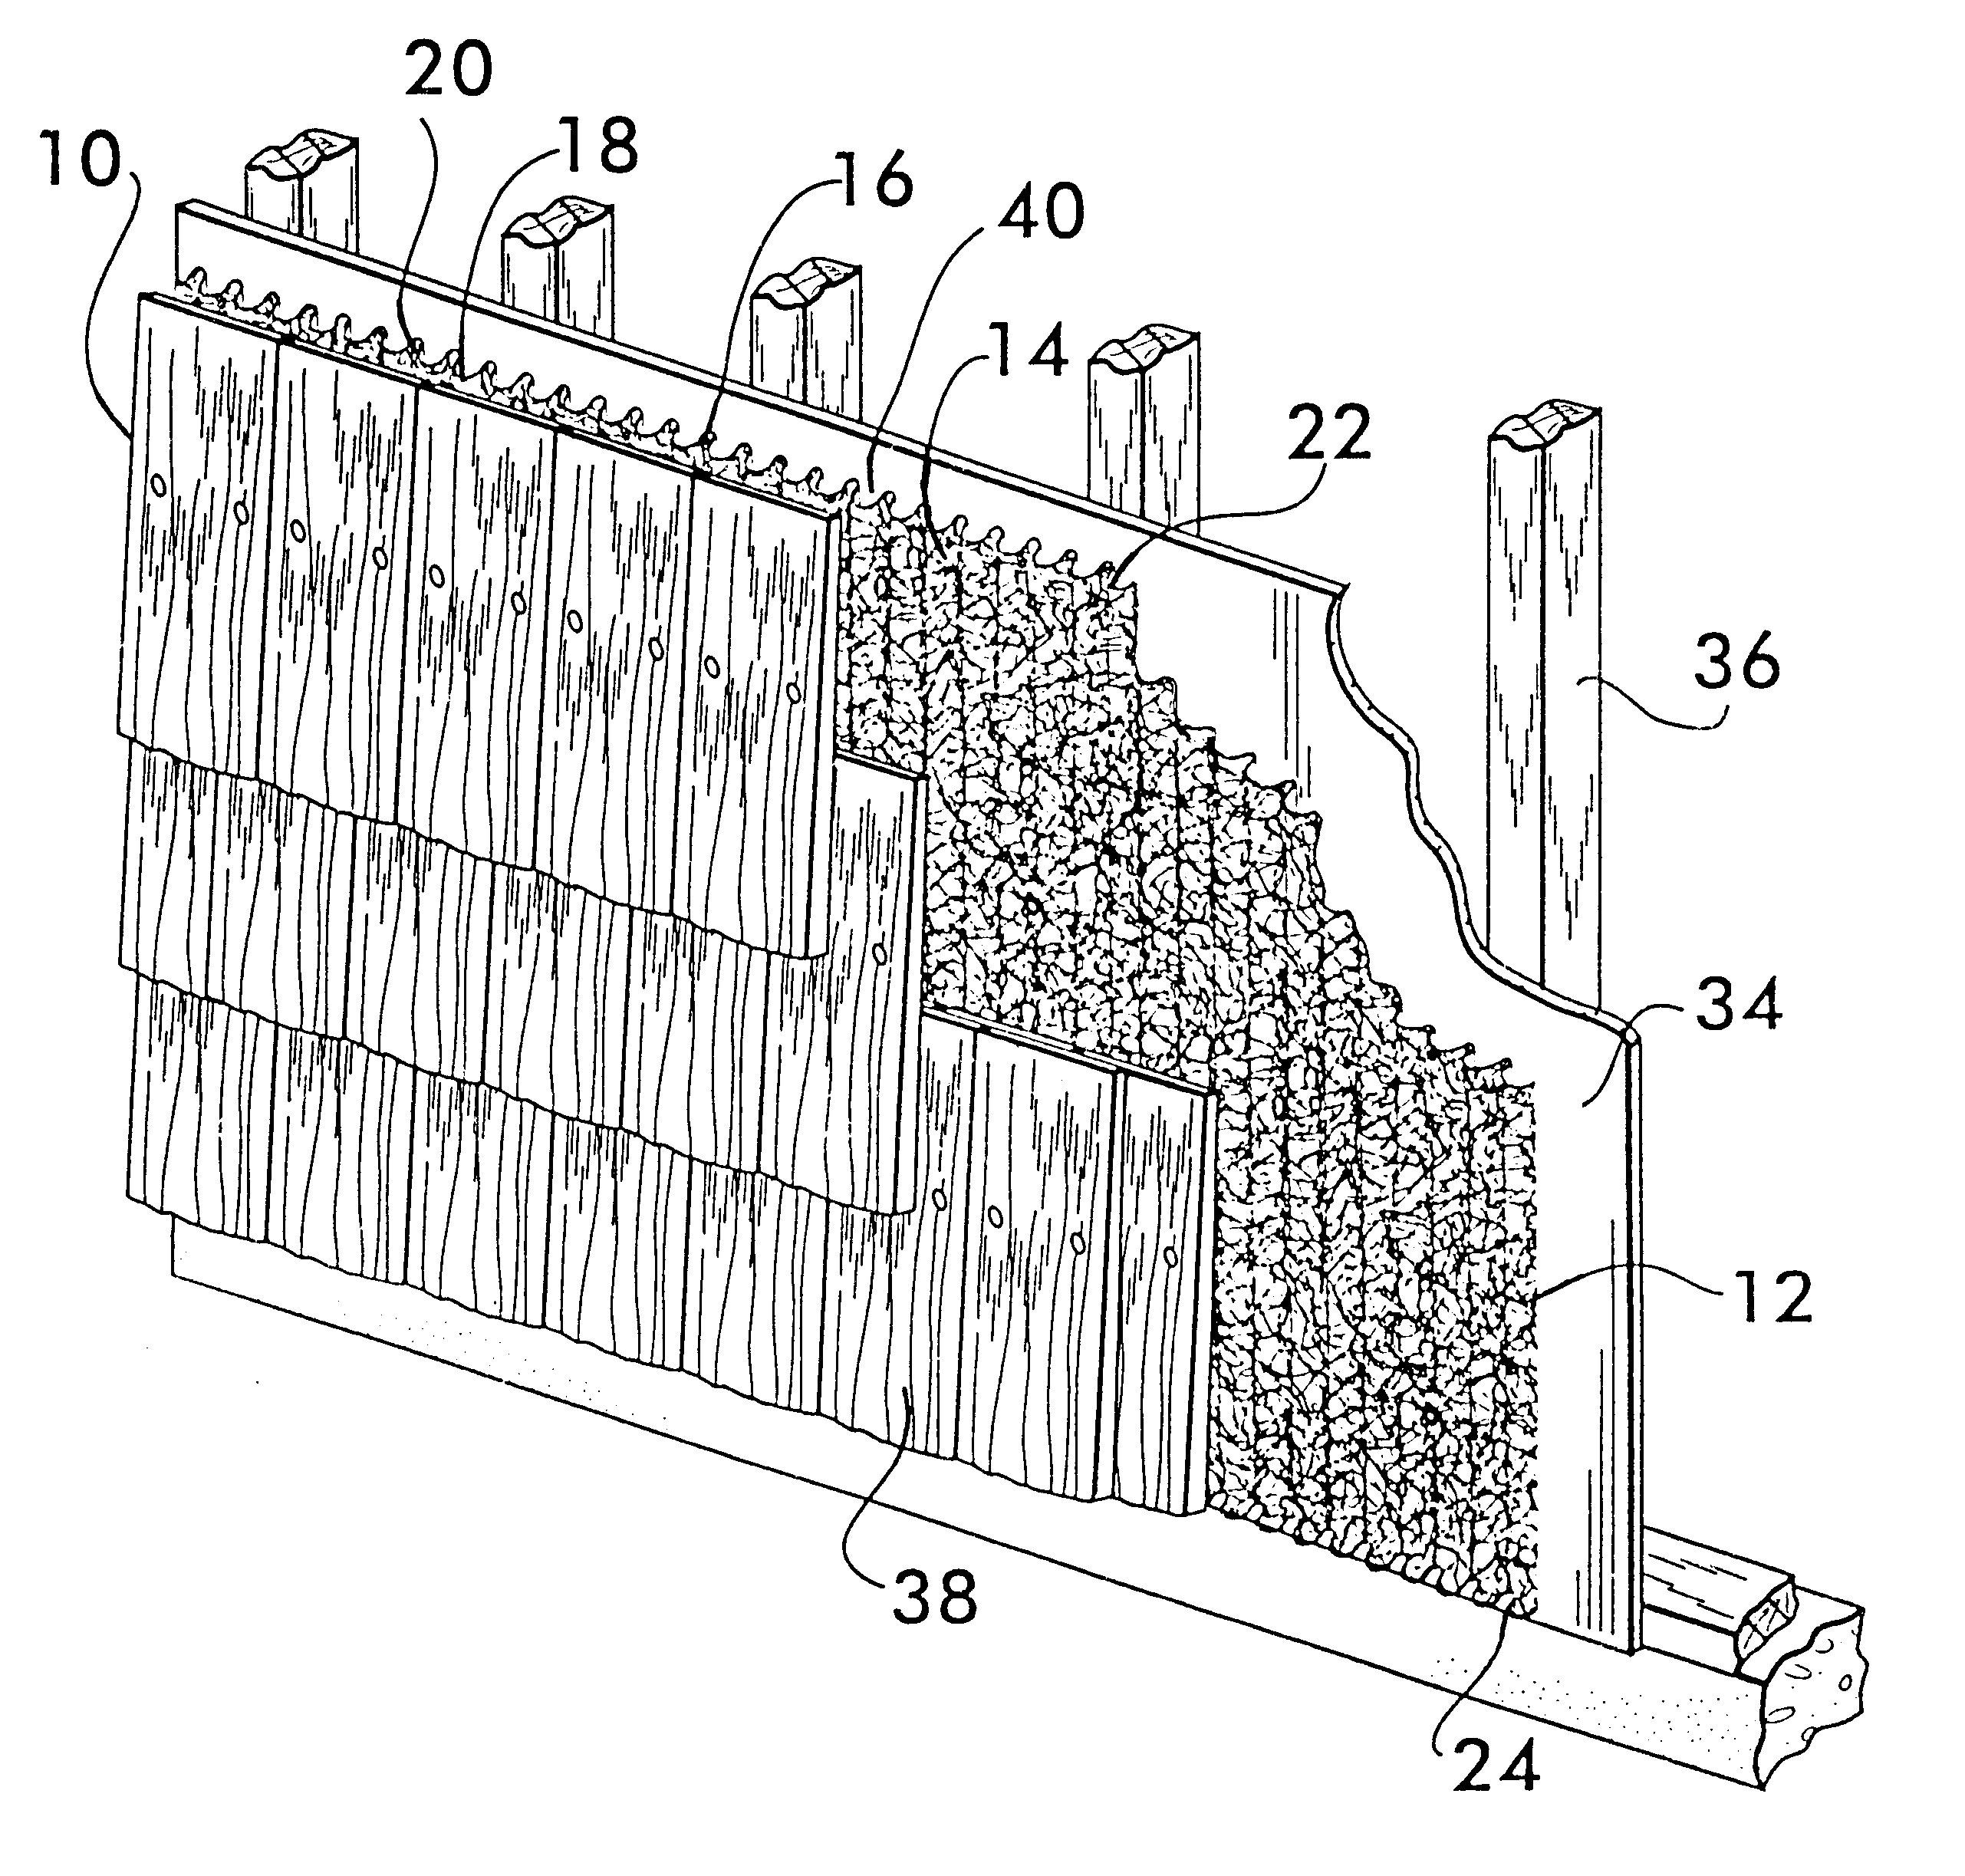 Spacer for providing drainage passageways within building structures